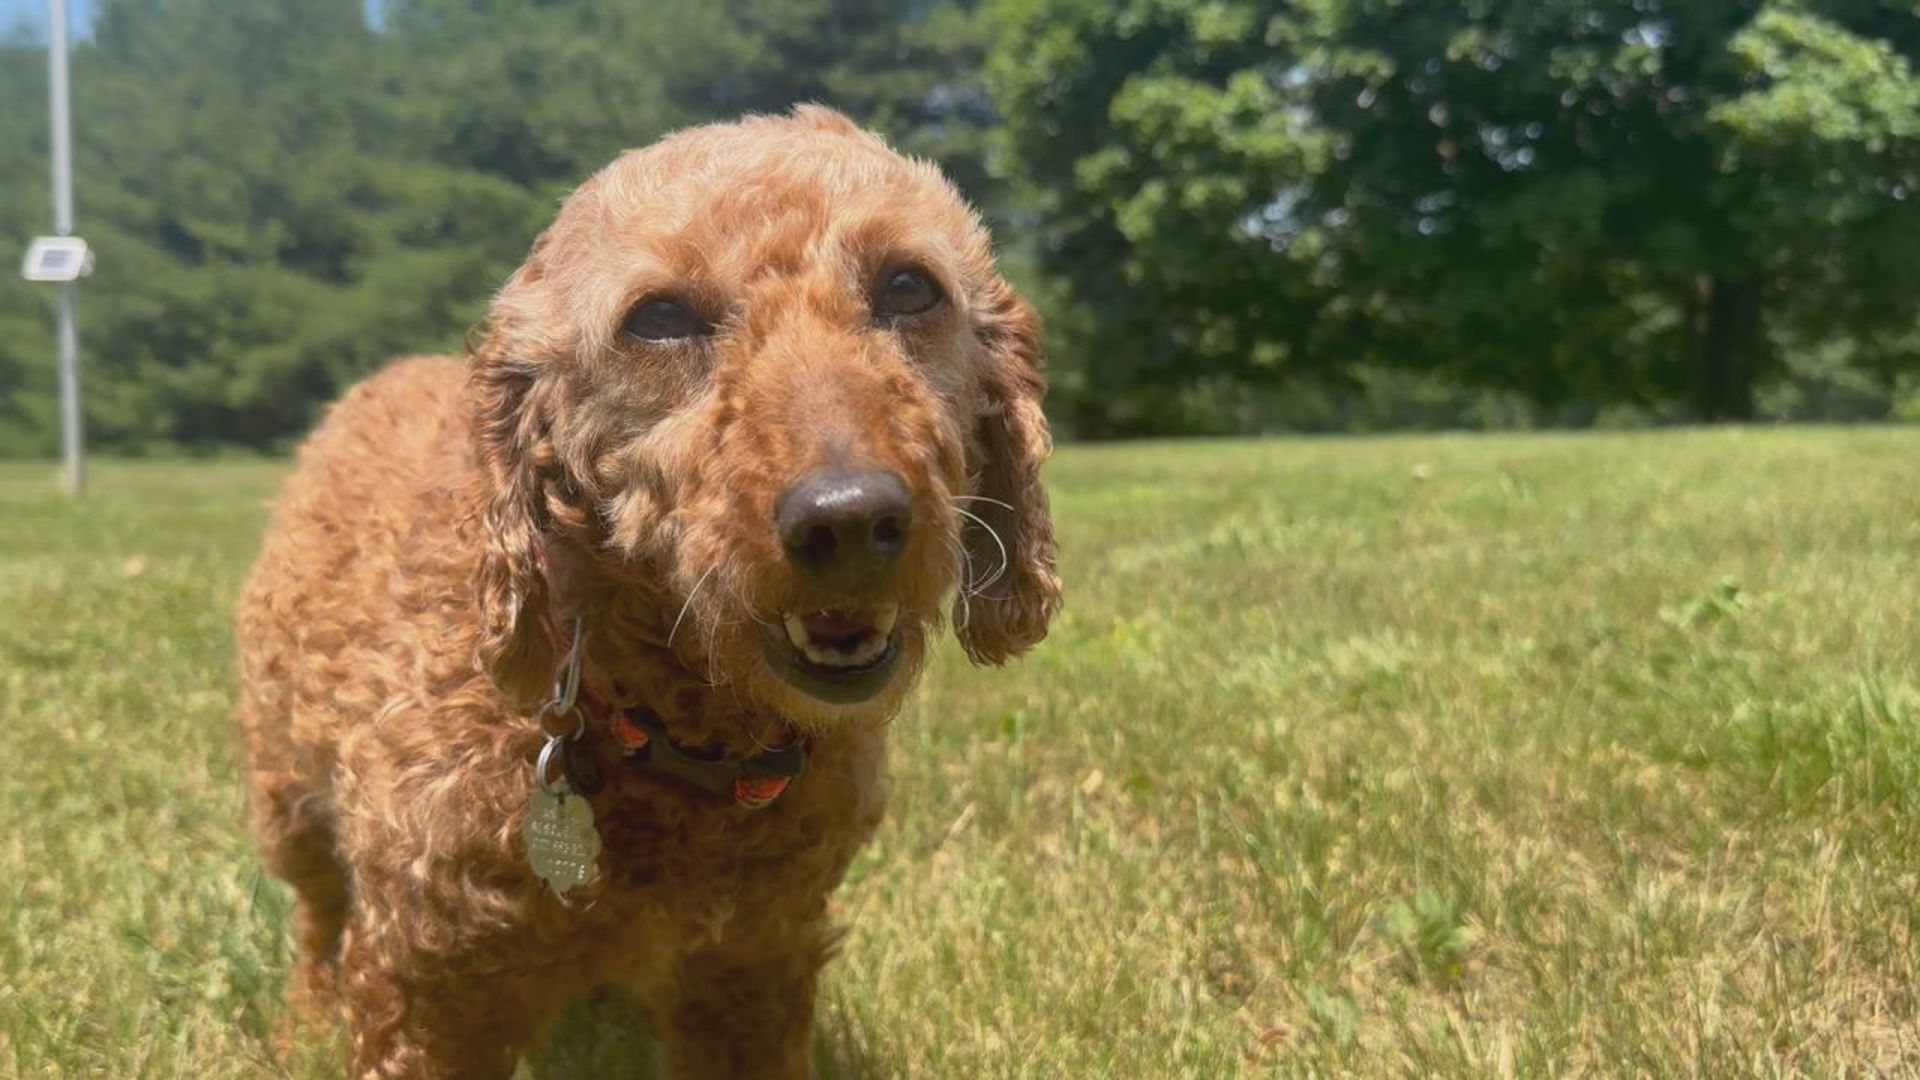 Toni is a 7-year-old poodle who spent the first half of her life with a breeder. She is now looking for her forever family with Animal Rescue Inc.